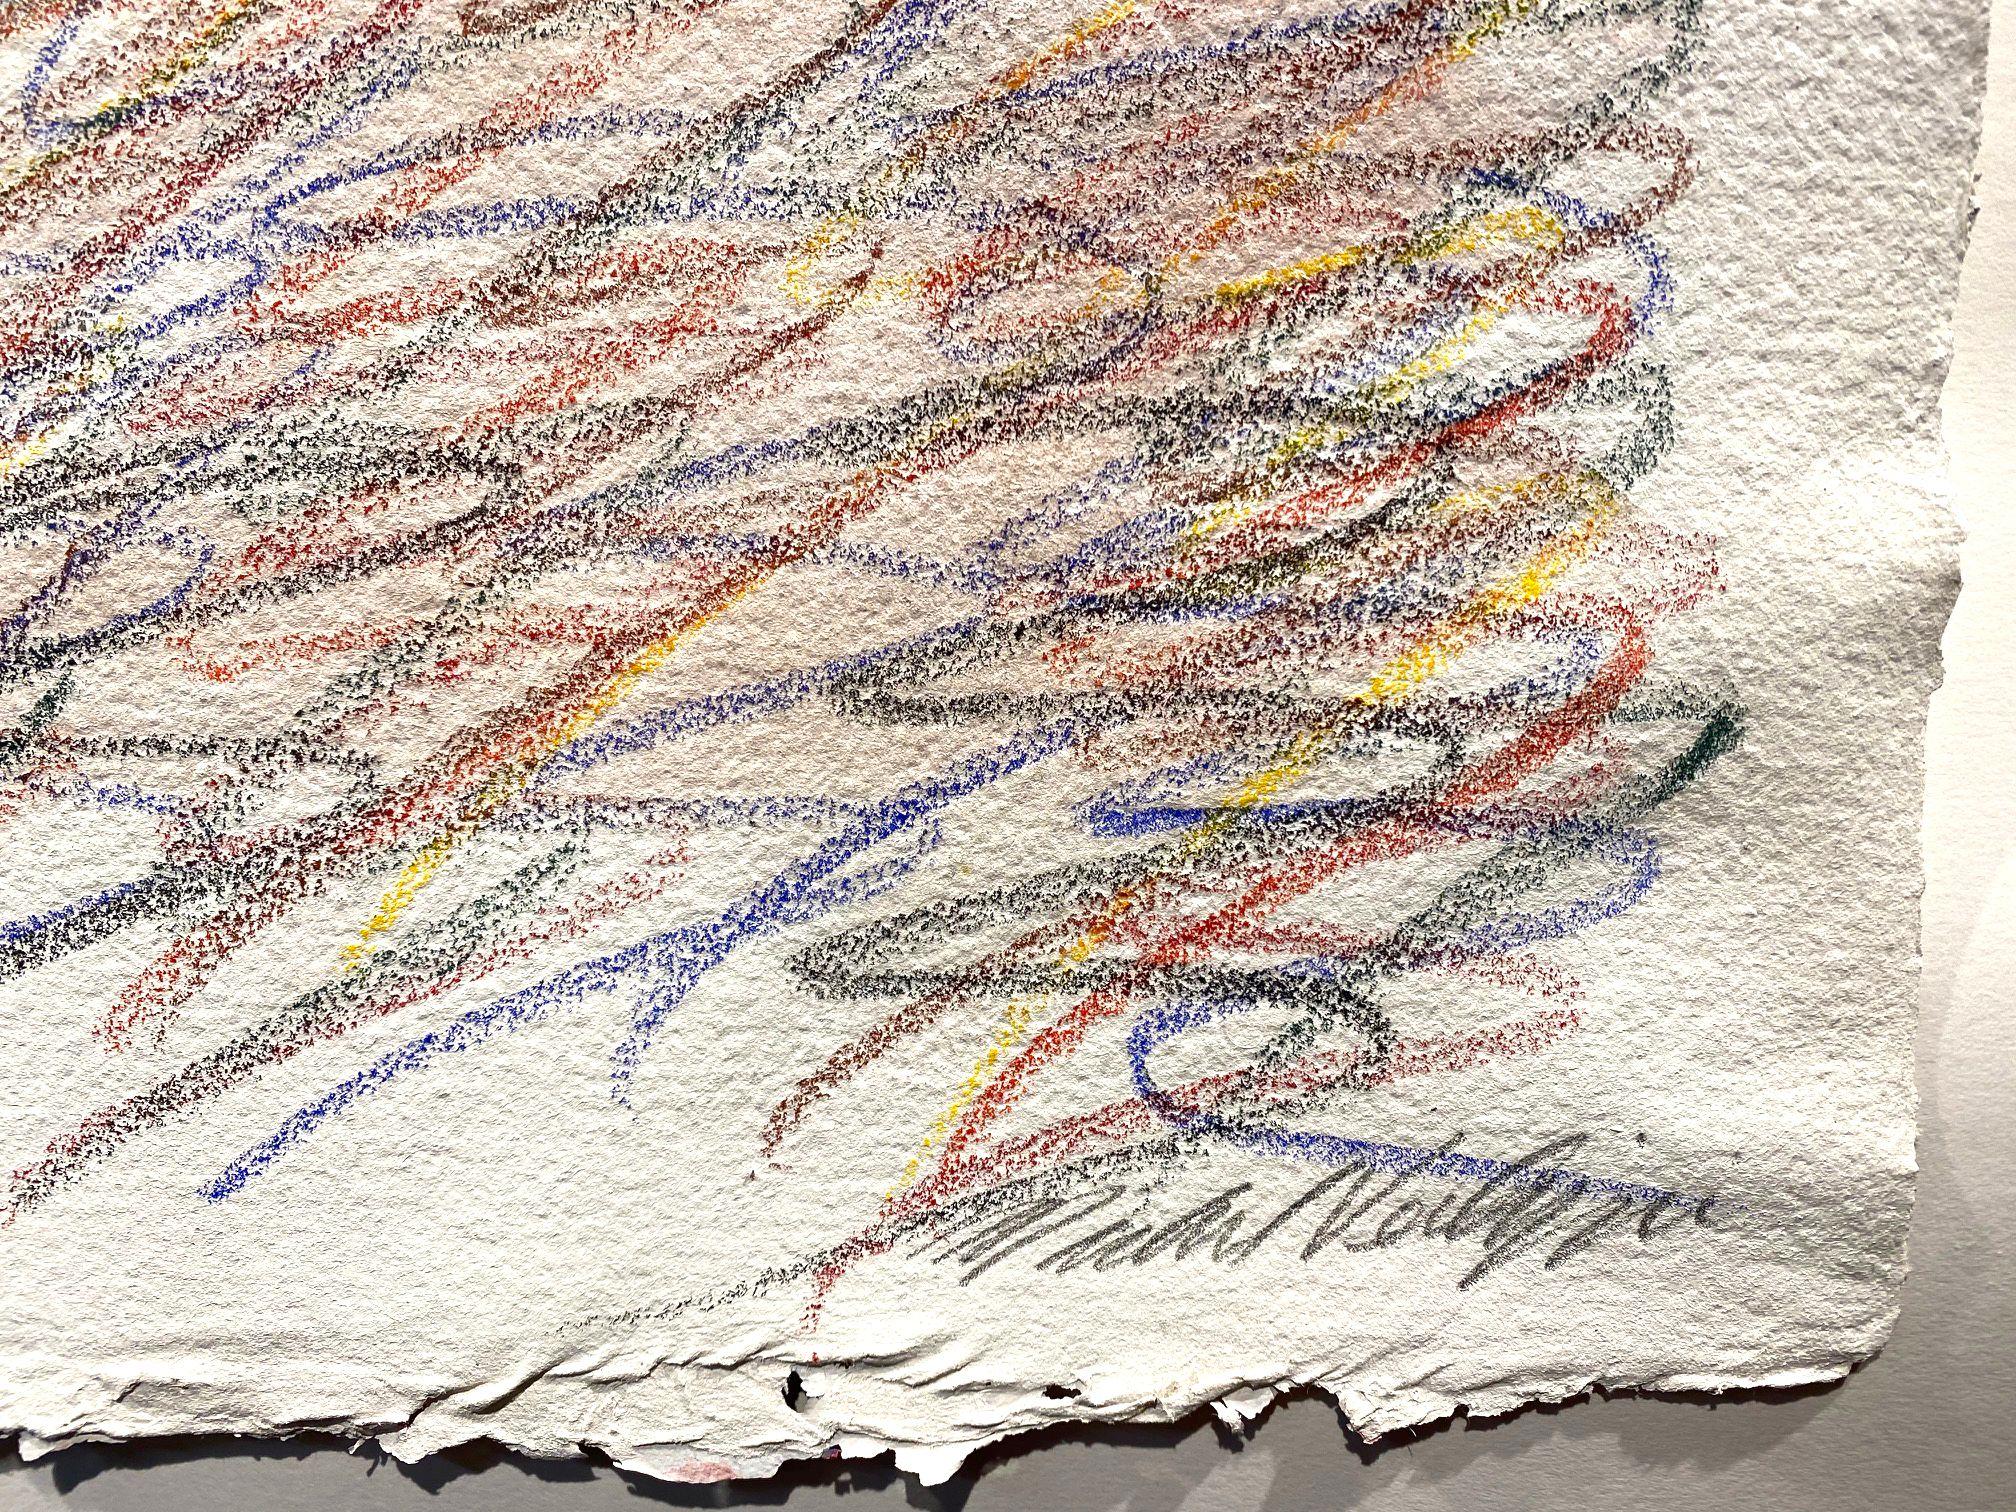 Drawing on Handmade Paper #7222020, Drawing, Pencil/Colored Pencil on Paper - Contemporary Art by Michael Verlangieri